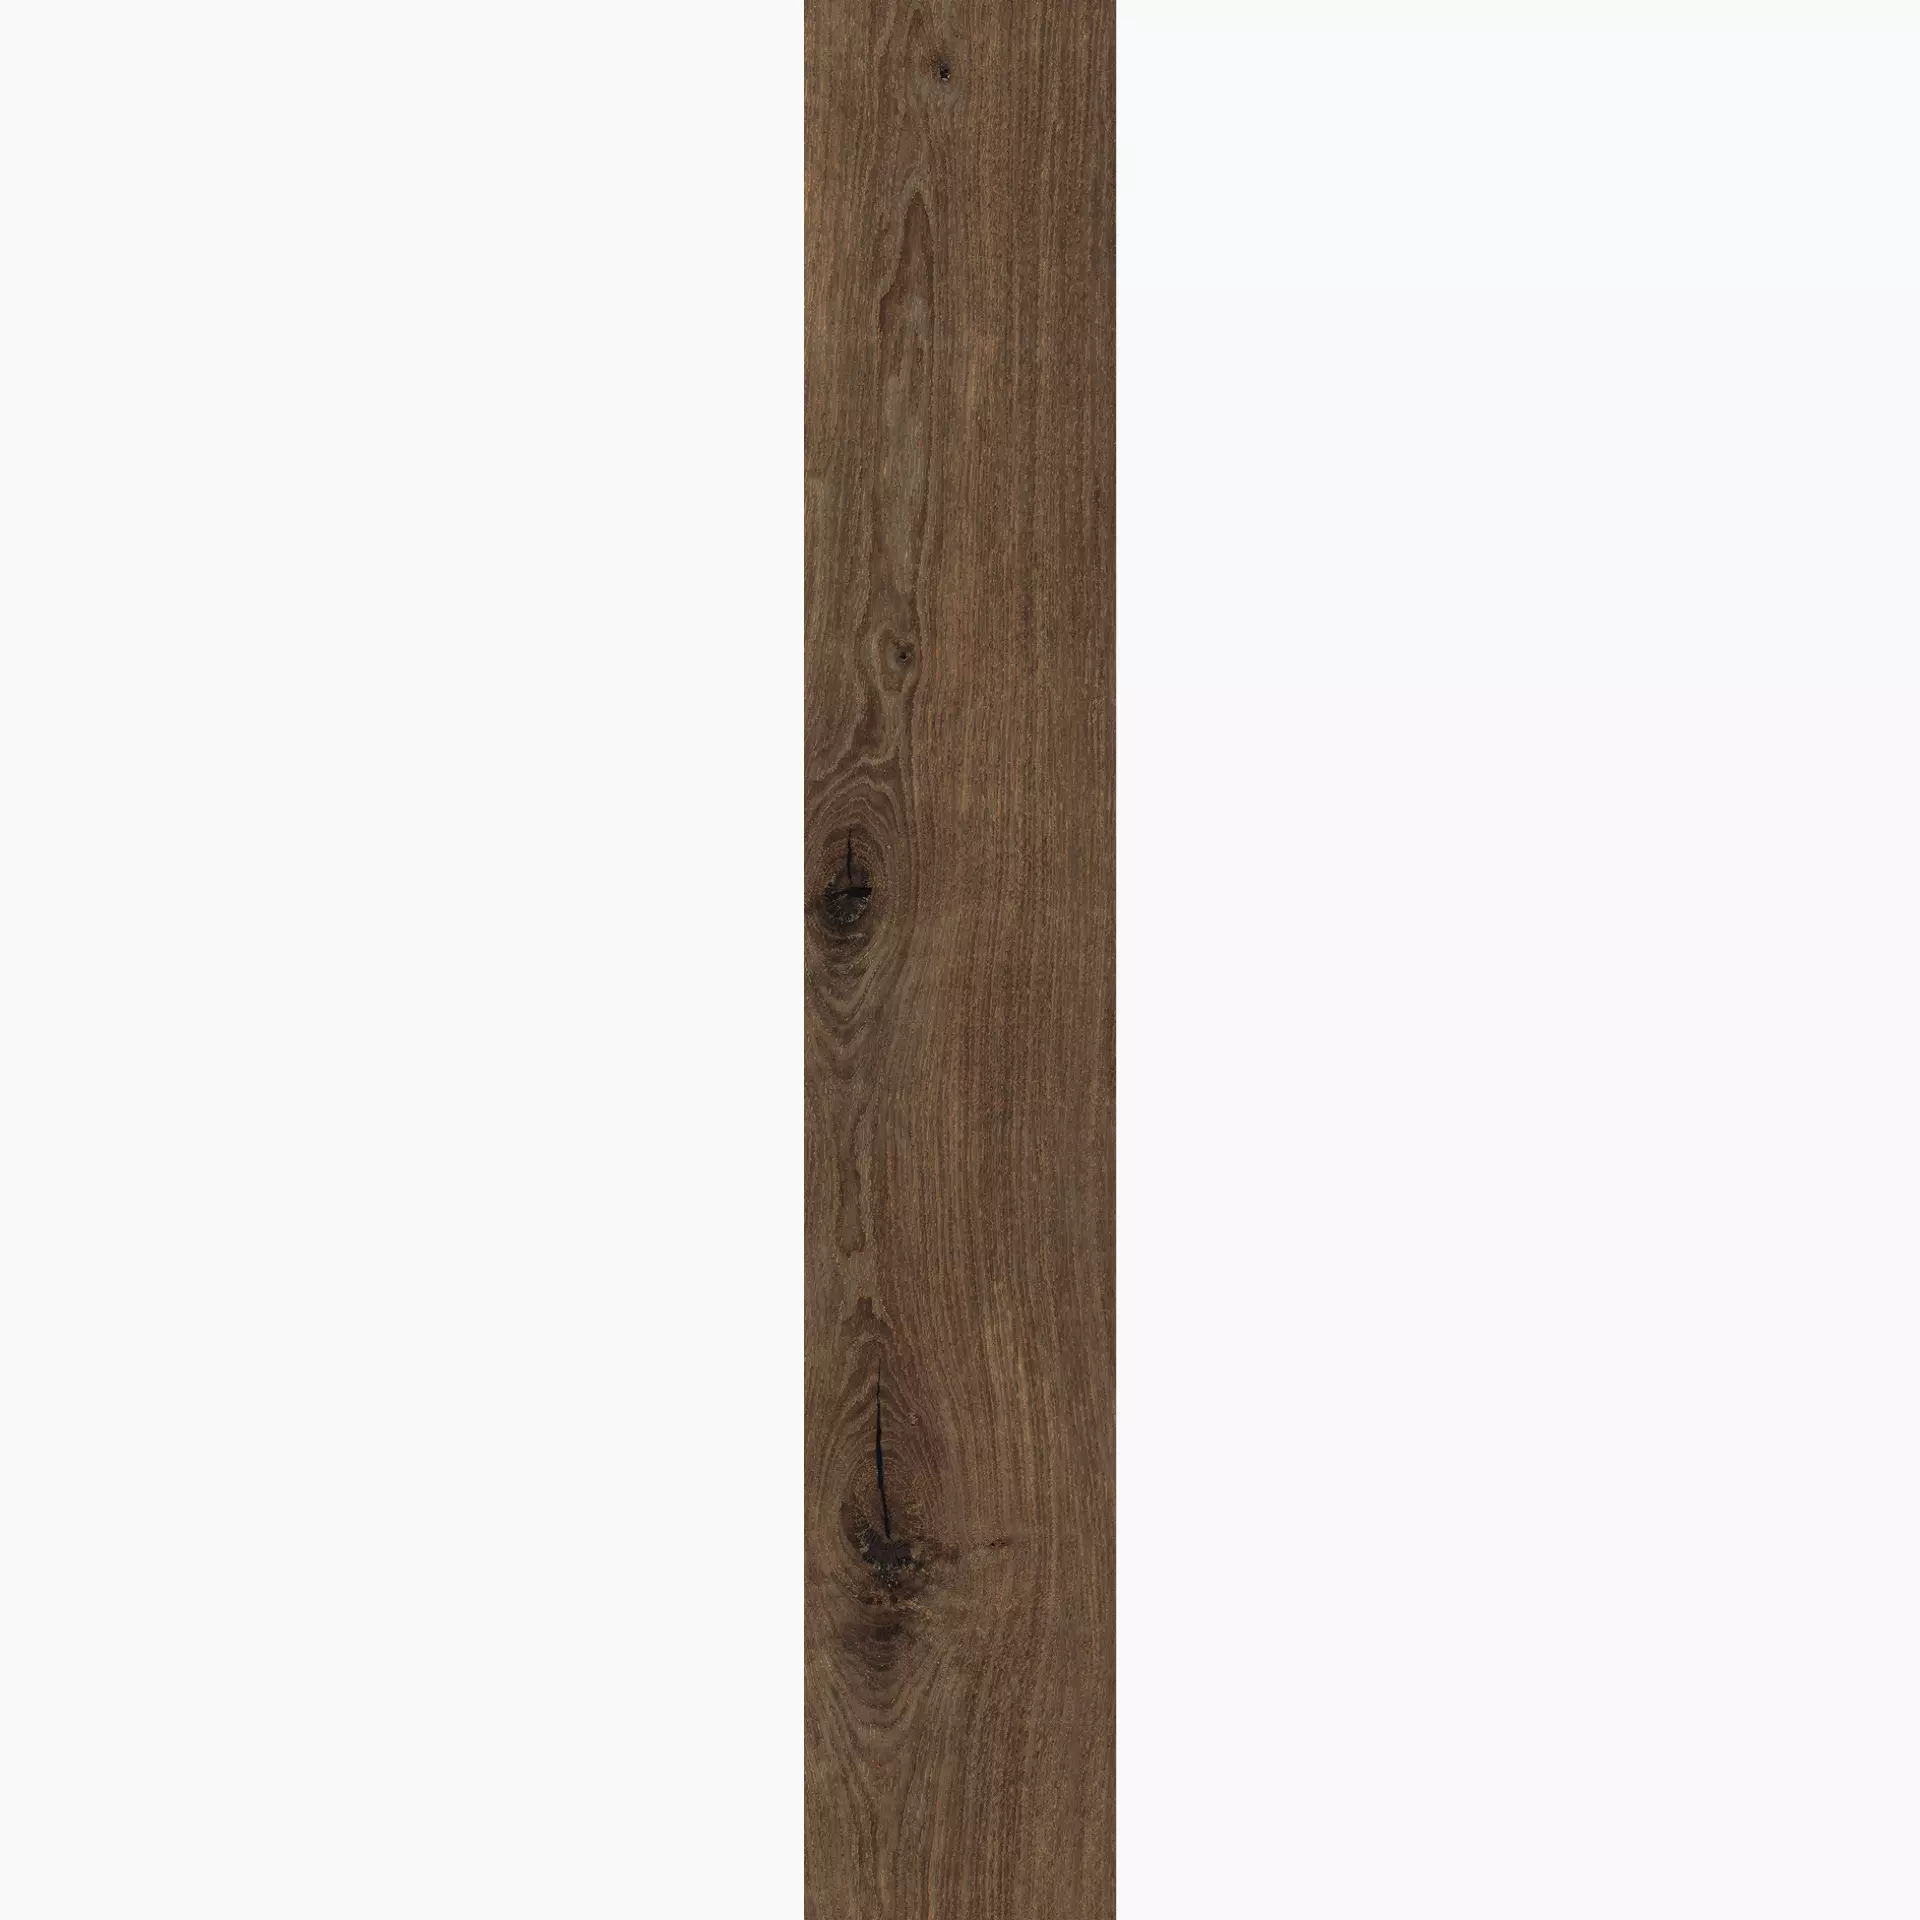 Novabell Artwood Wenge Naturale AWD66RT 26x160cm rectified 9,5mm